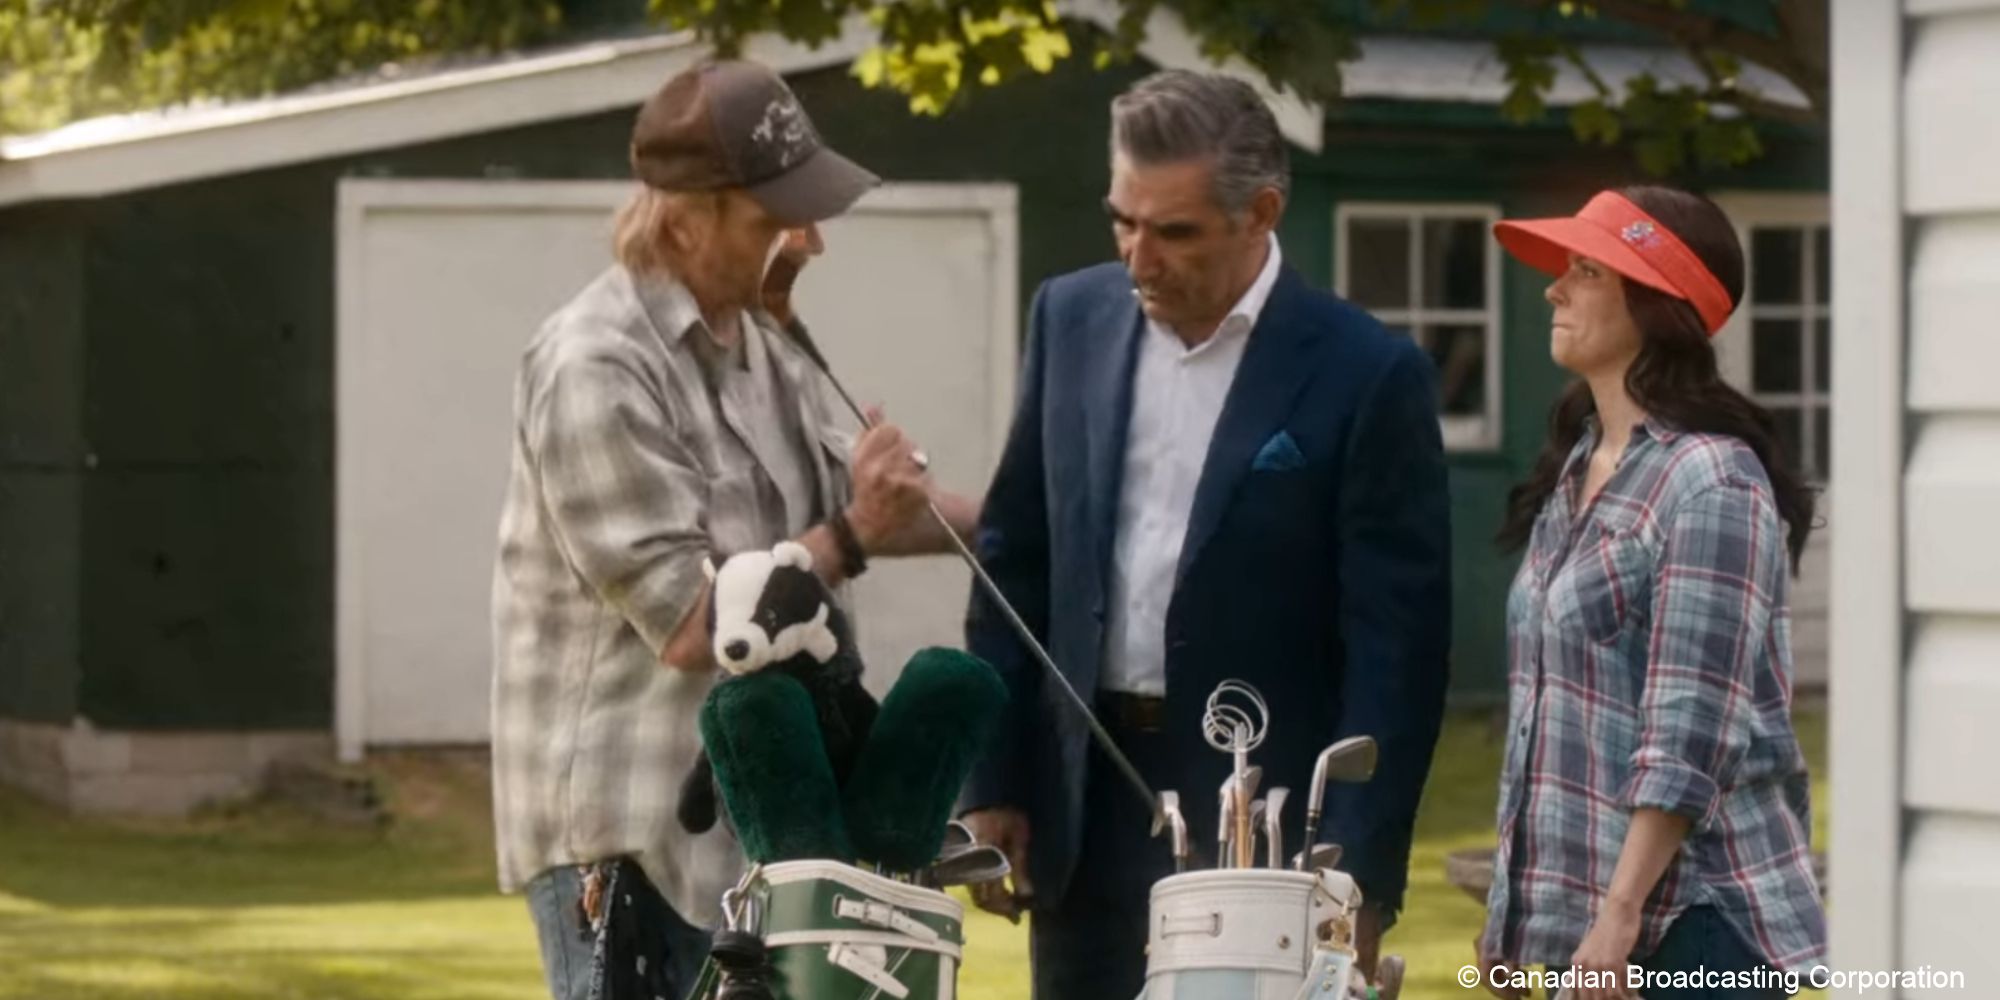 Roland and Johnny handle golf clubs while Stevie watches with amusement